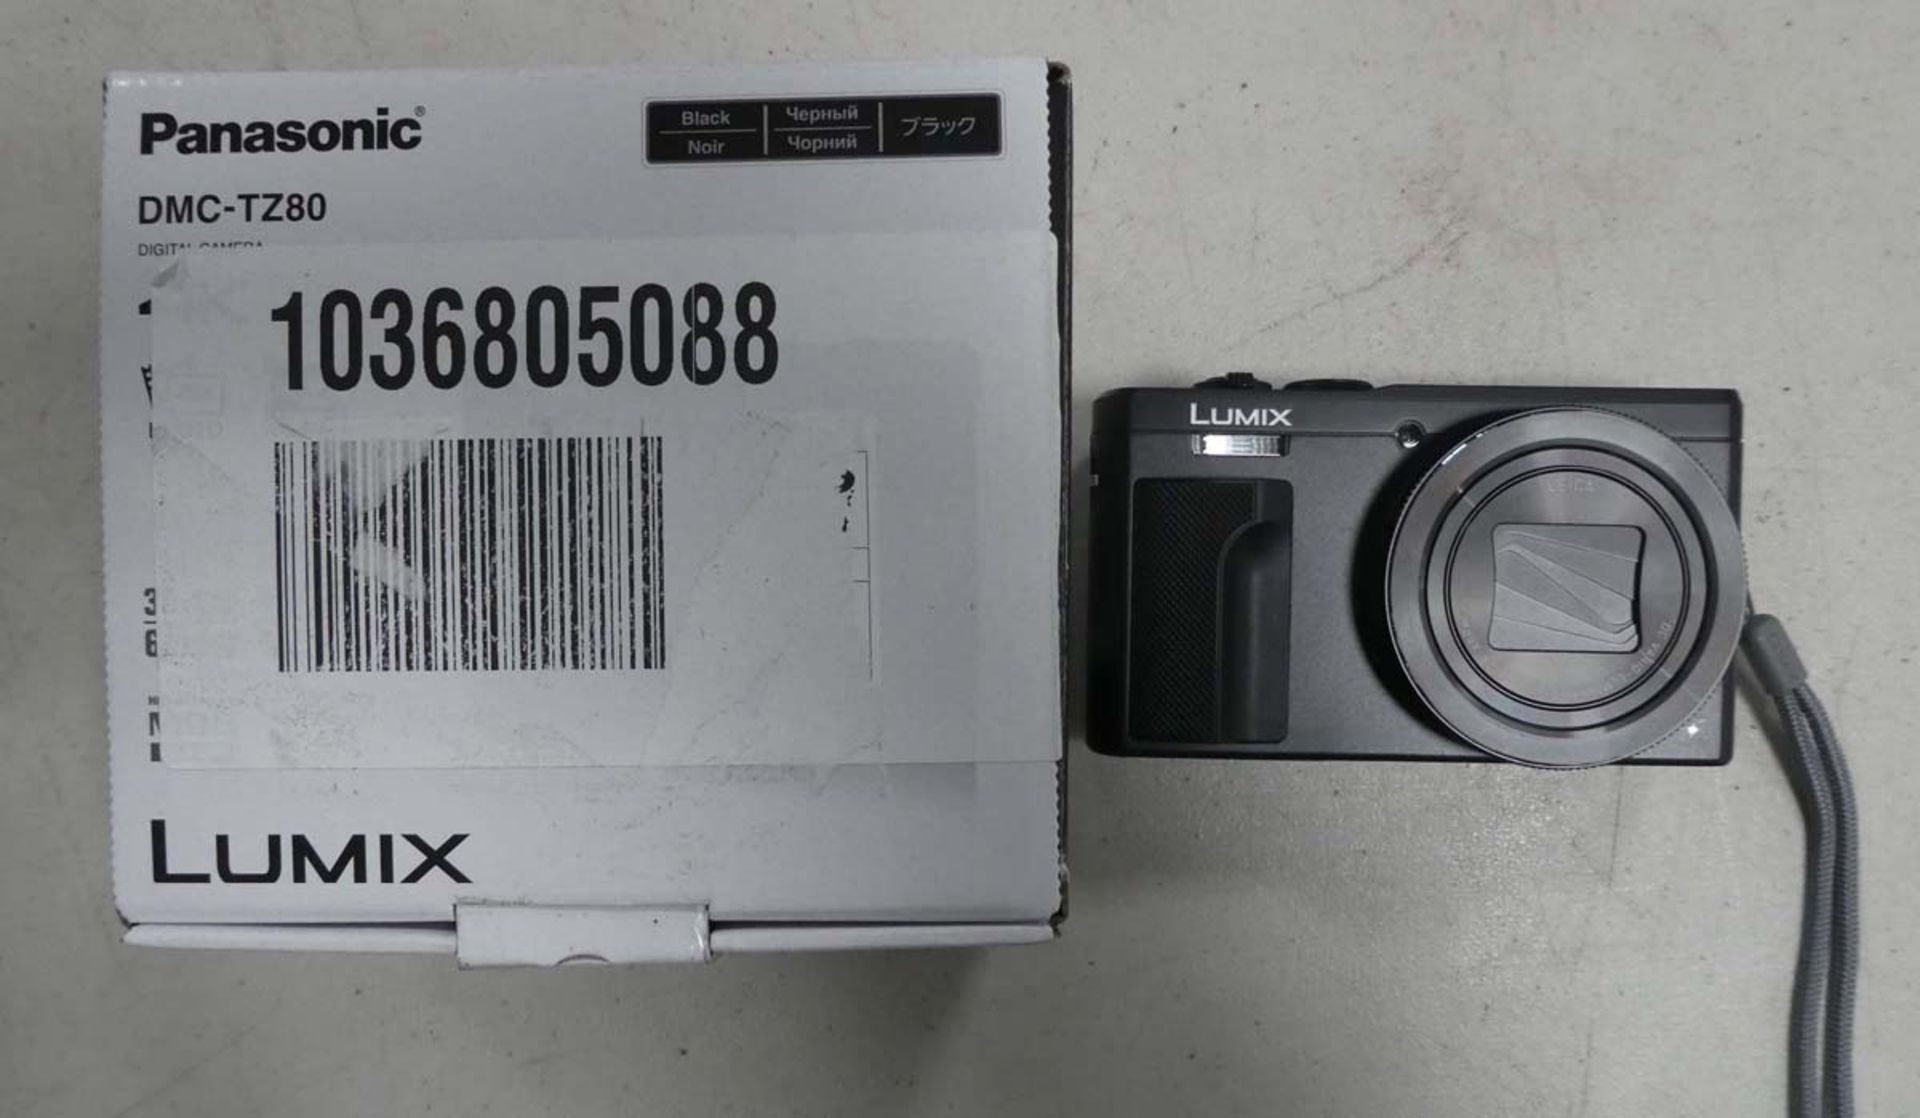 Panasonic TZ80 digital camera with battery, charger and box